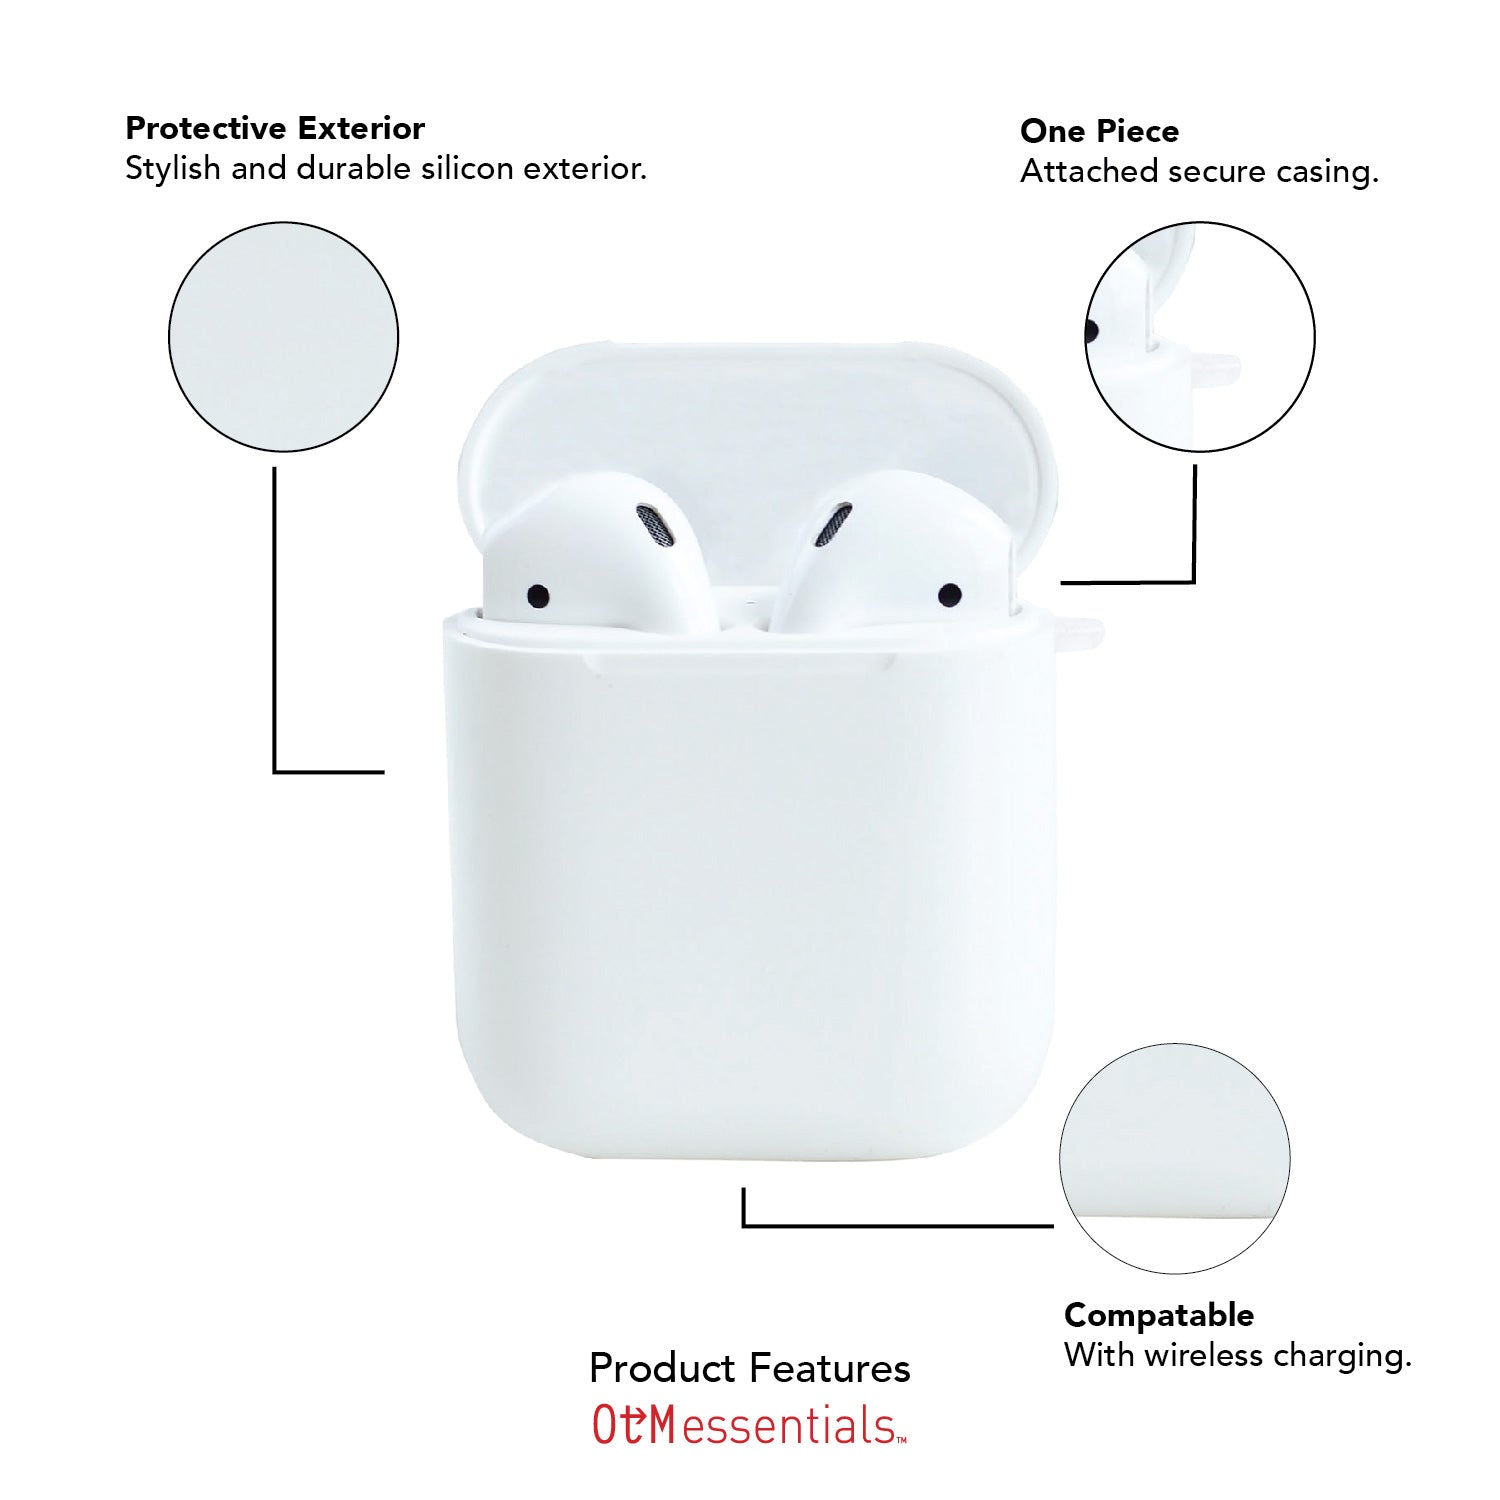 Silicon Airpod Cover Jordan White & Black, For Stylish And Easy To